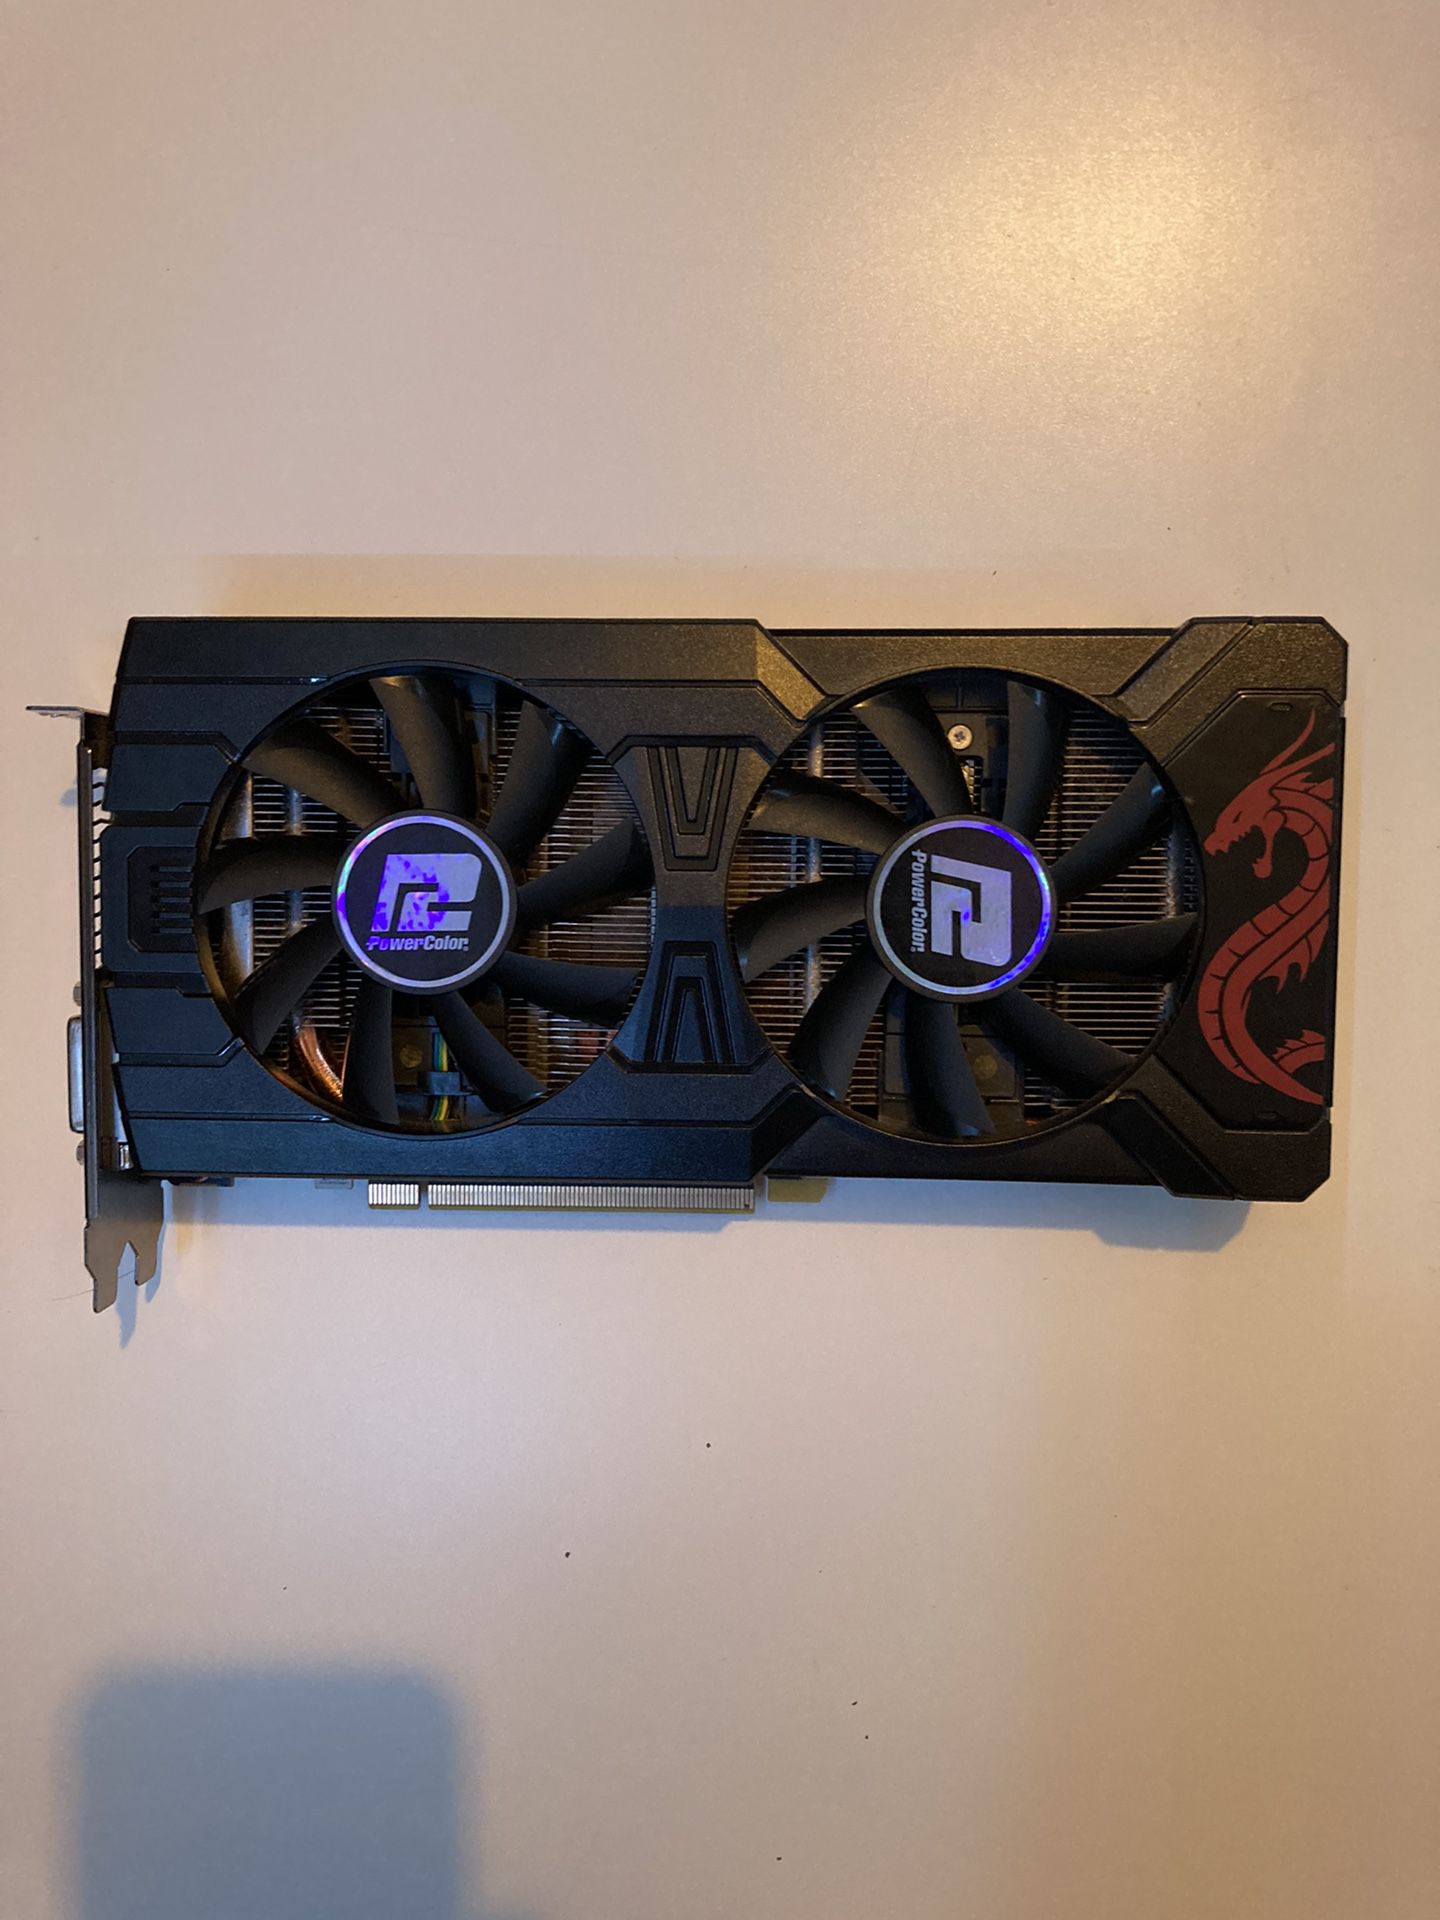 PowerColor Red Dragon Radeon RX AXRX 570 4GBD5-3DHD/OC for Sale in Brentwood, CA - OfferUp